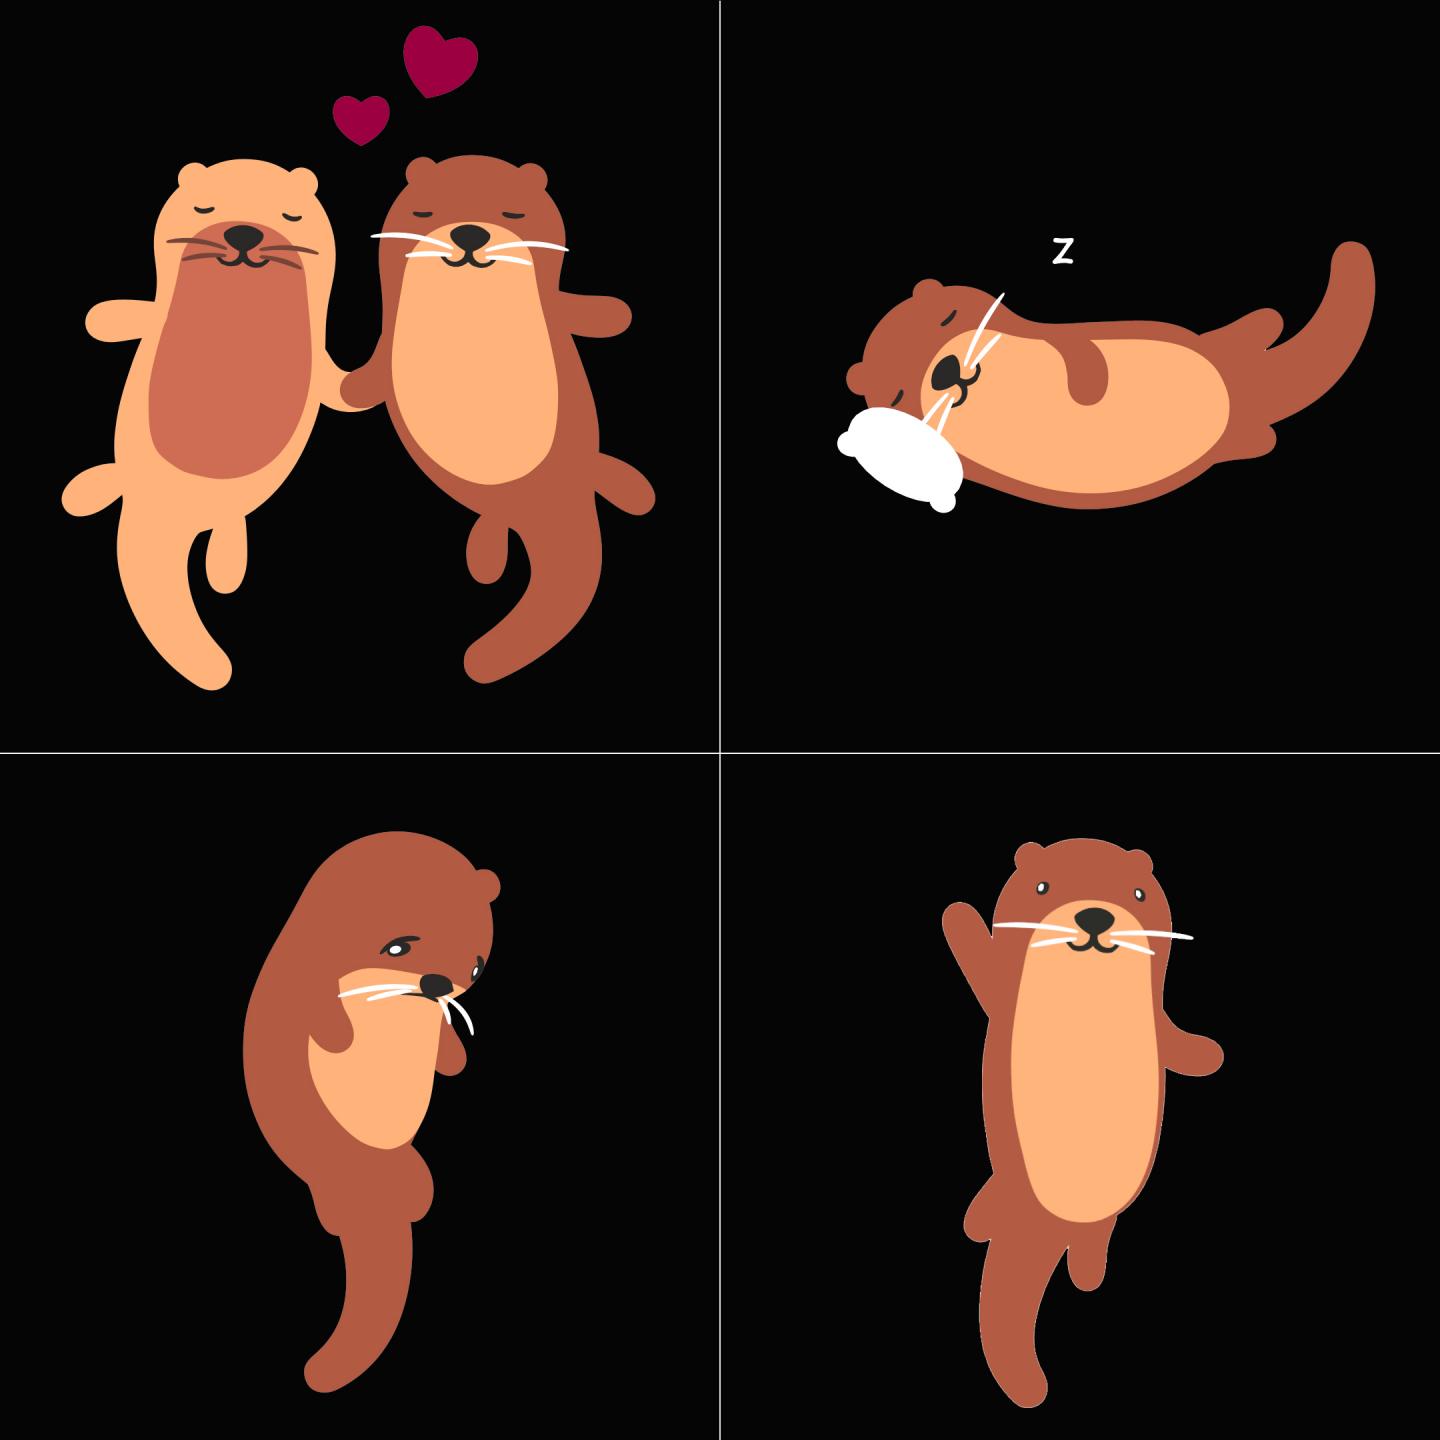 Significant Otter emotions